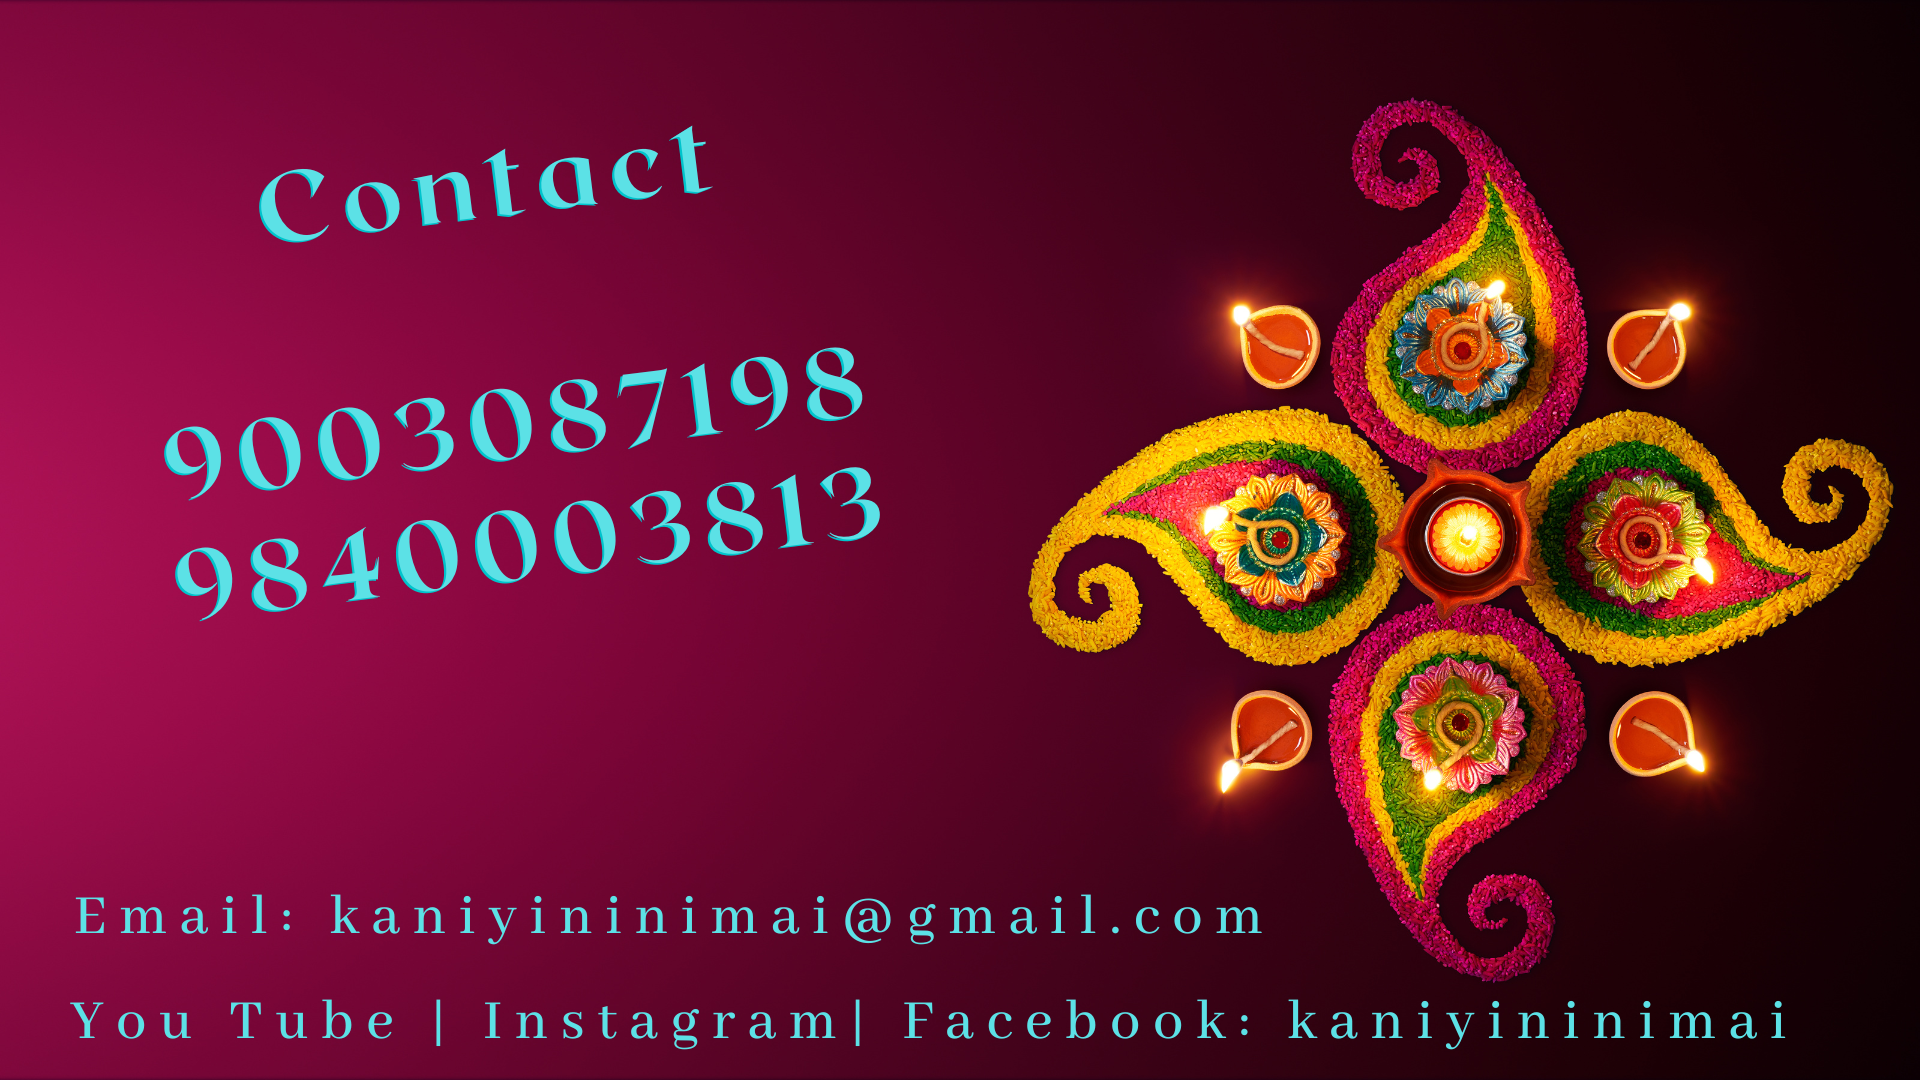 Kaniyin Inimai Youtube Channel Contact Number for Jadai in Chennai